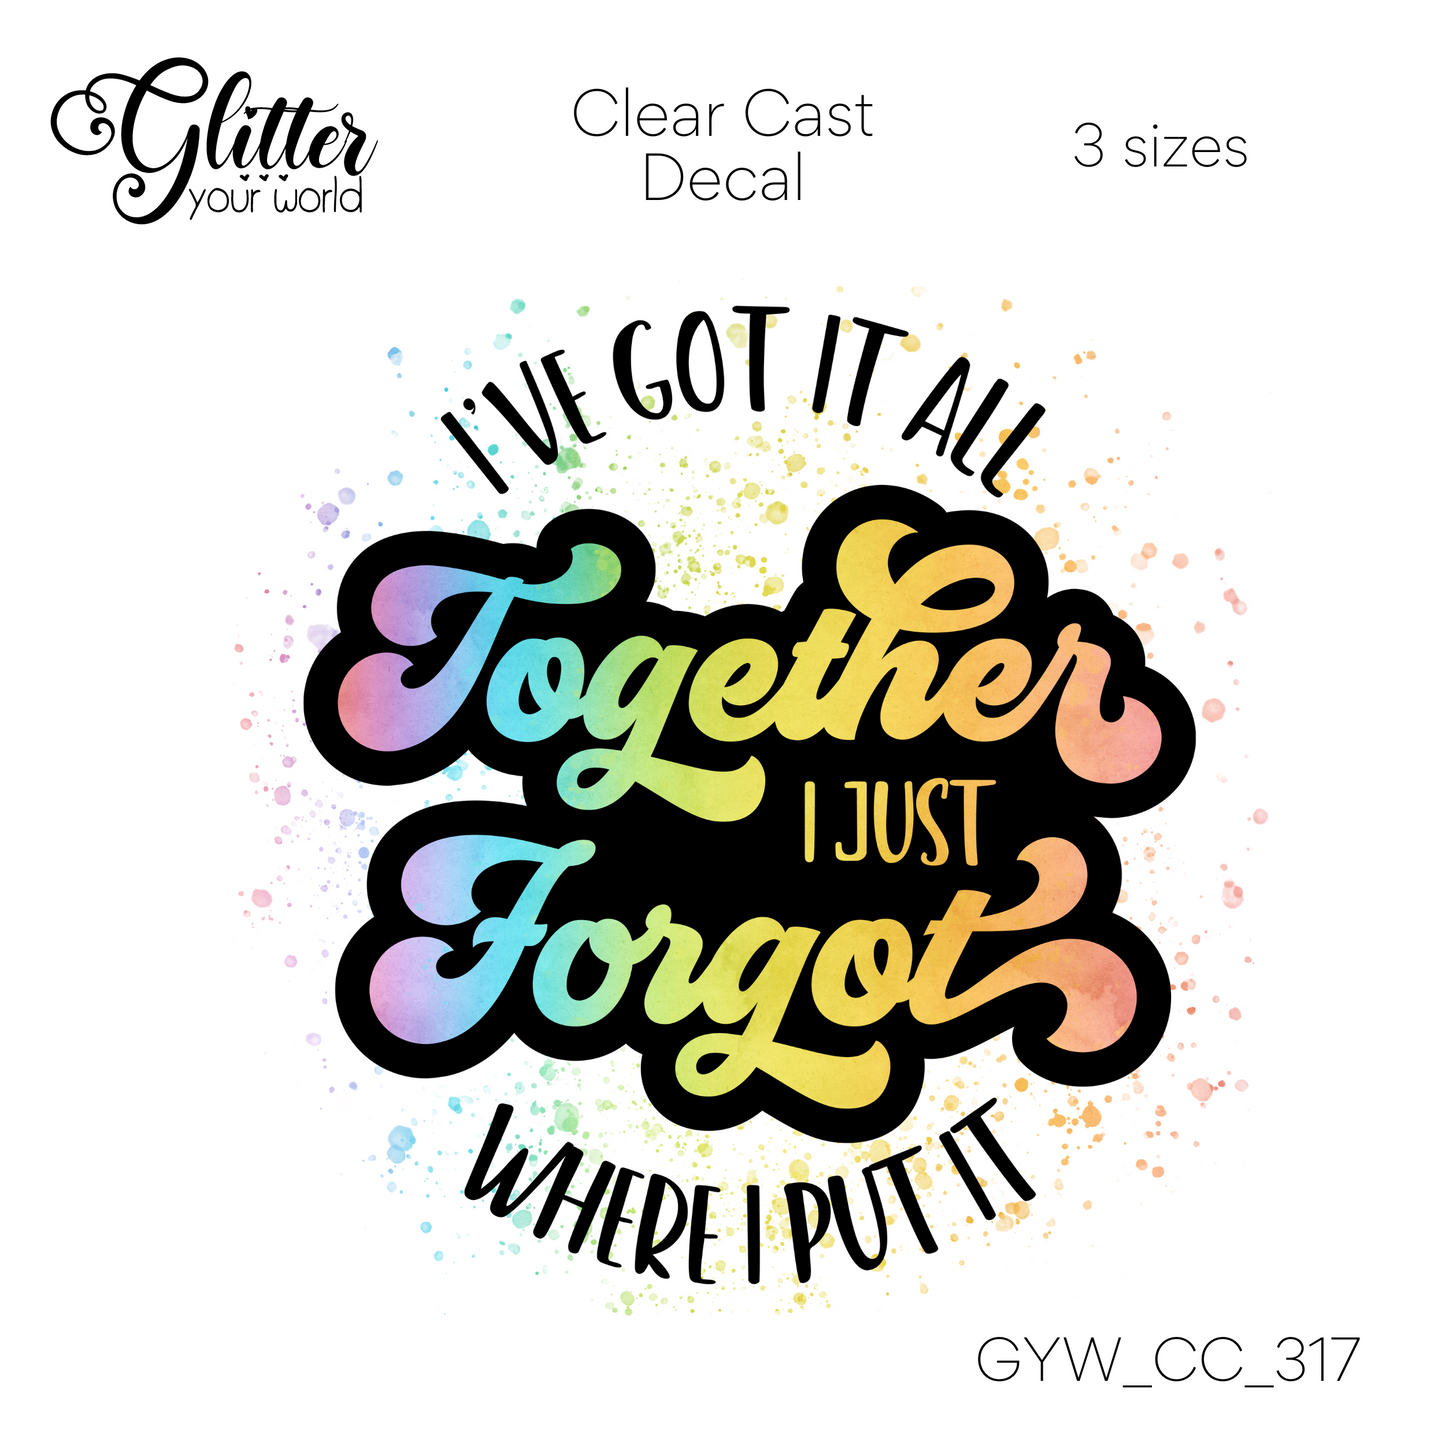 I've Got It All Together It CC_317 Clear Cast Decal